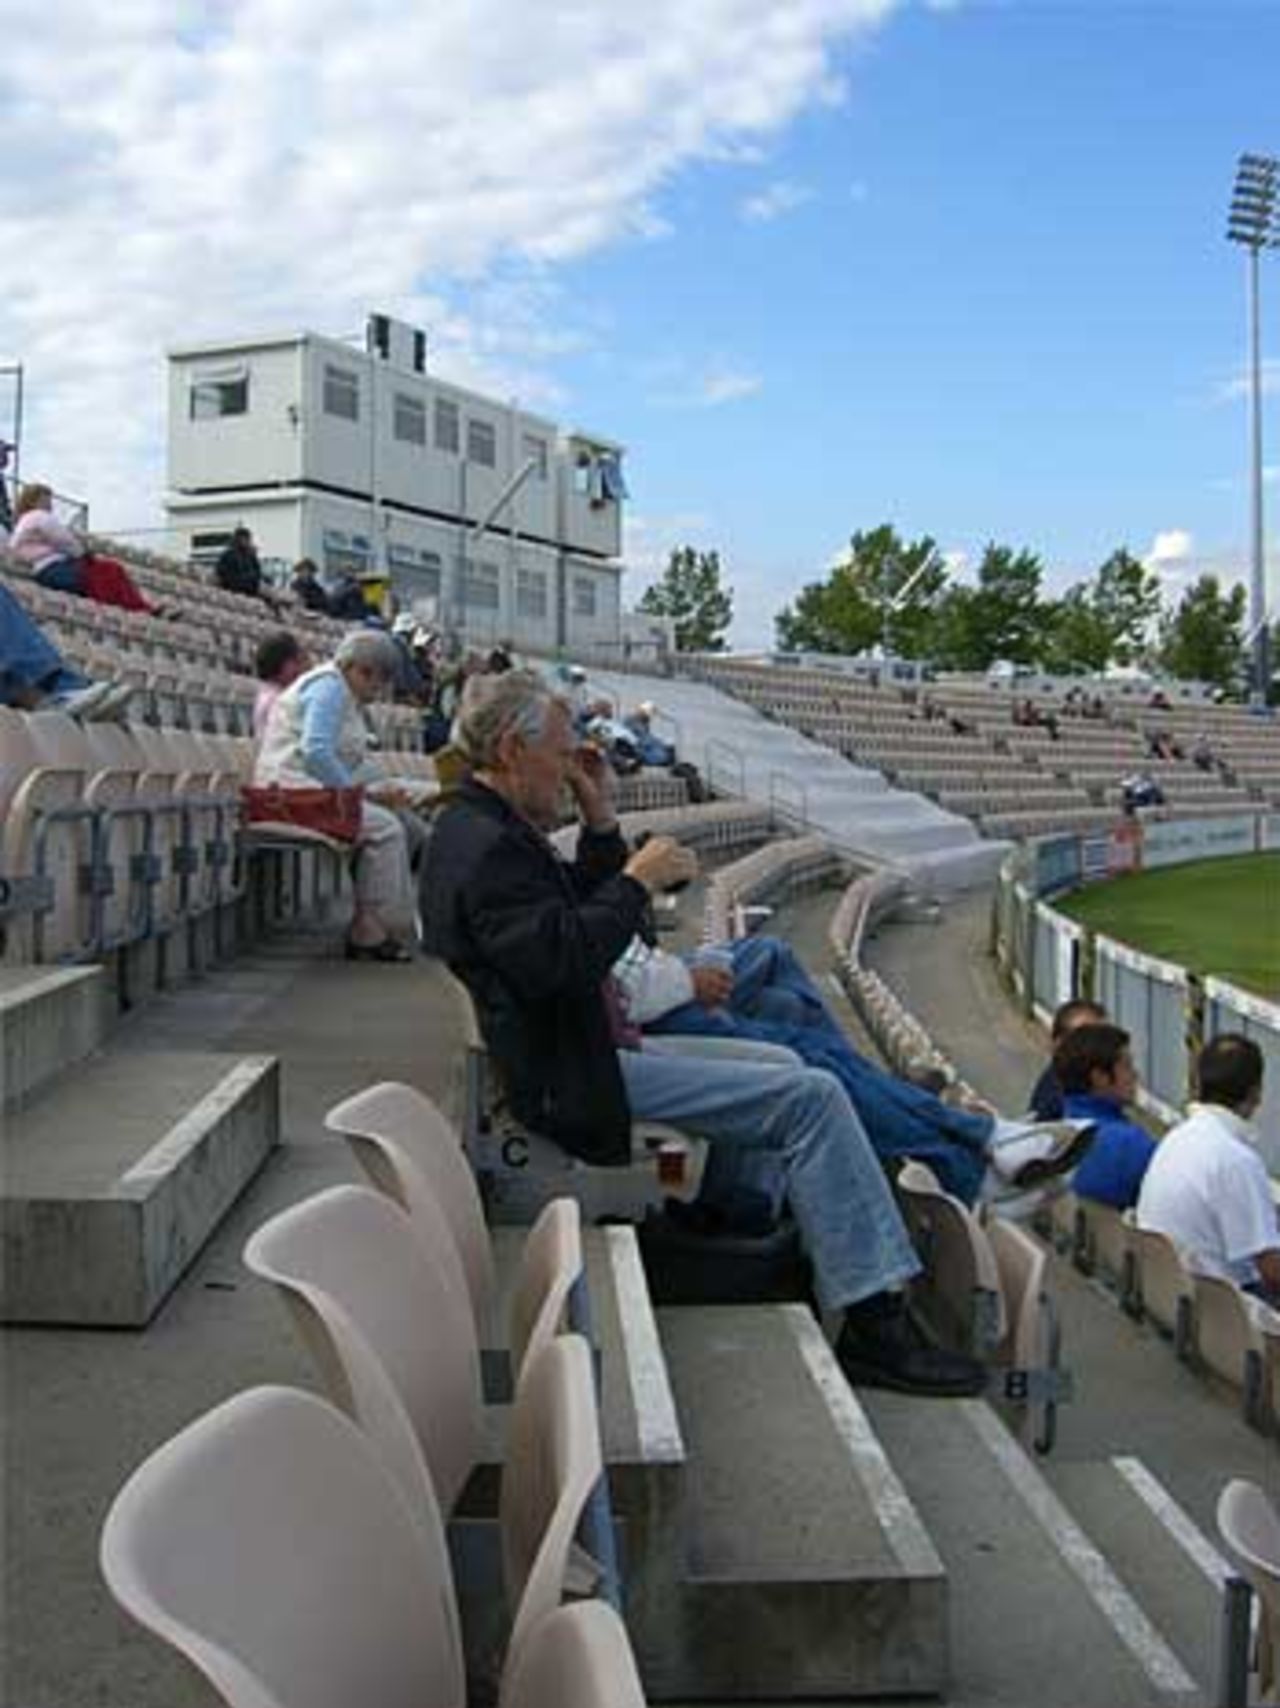 Packing them in at The Rose Bowl, England v india, 4th women's ODI, Southampton, August 24, 2006